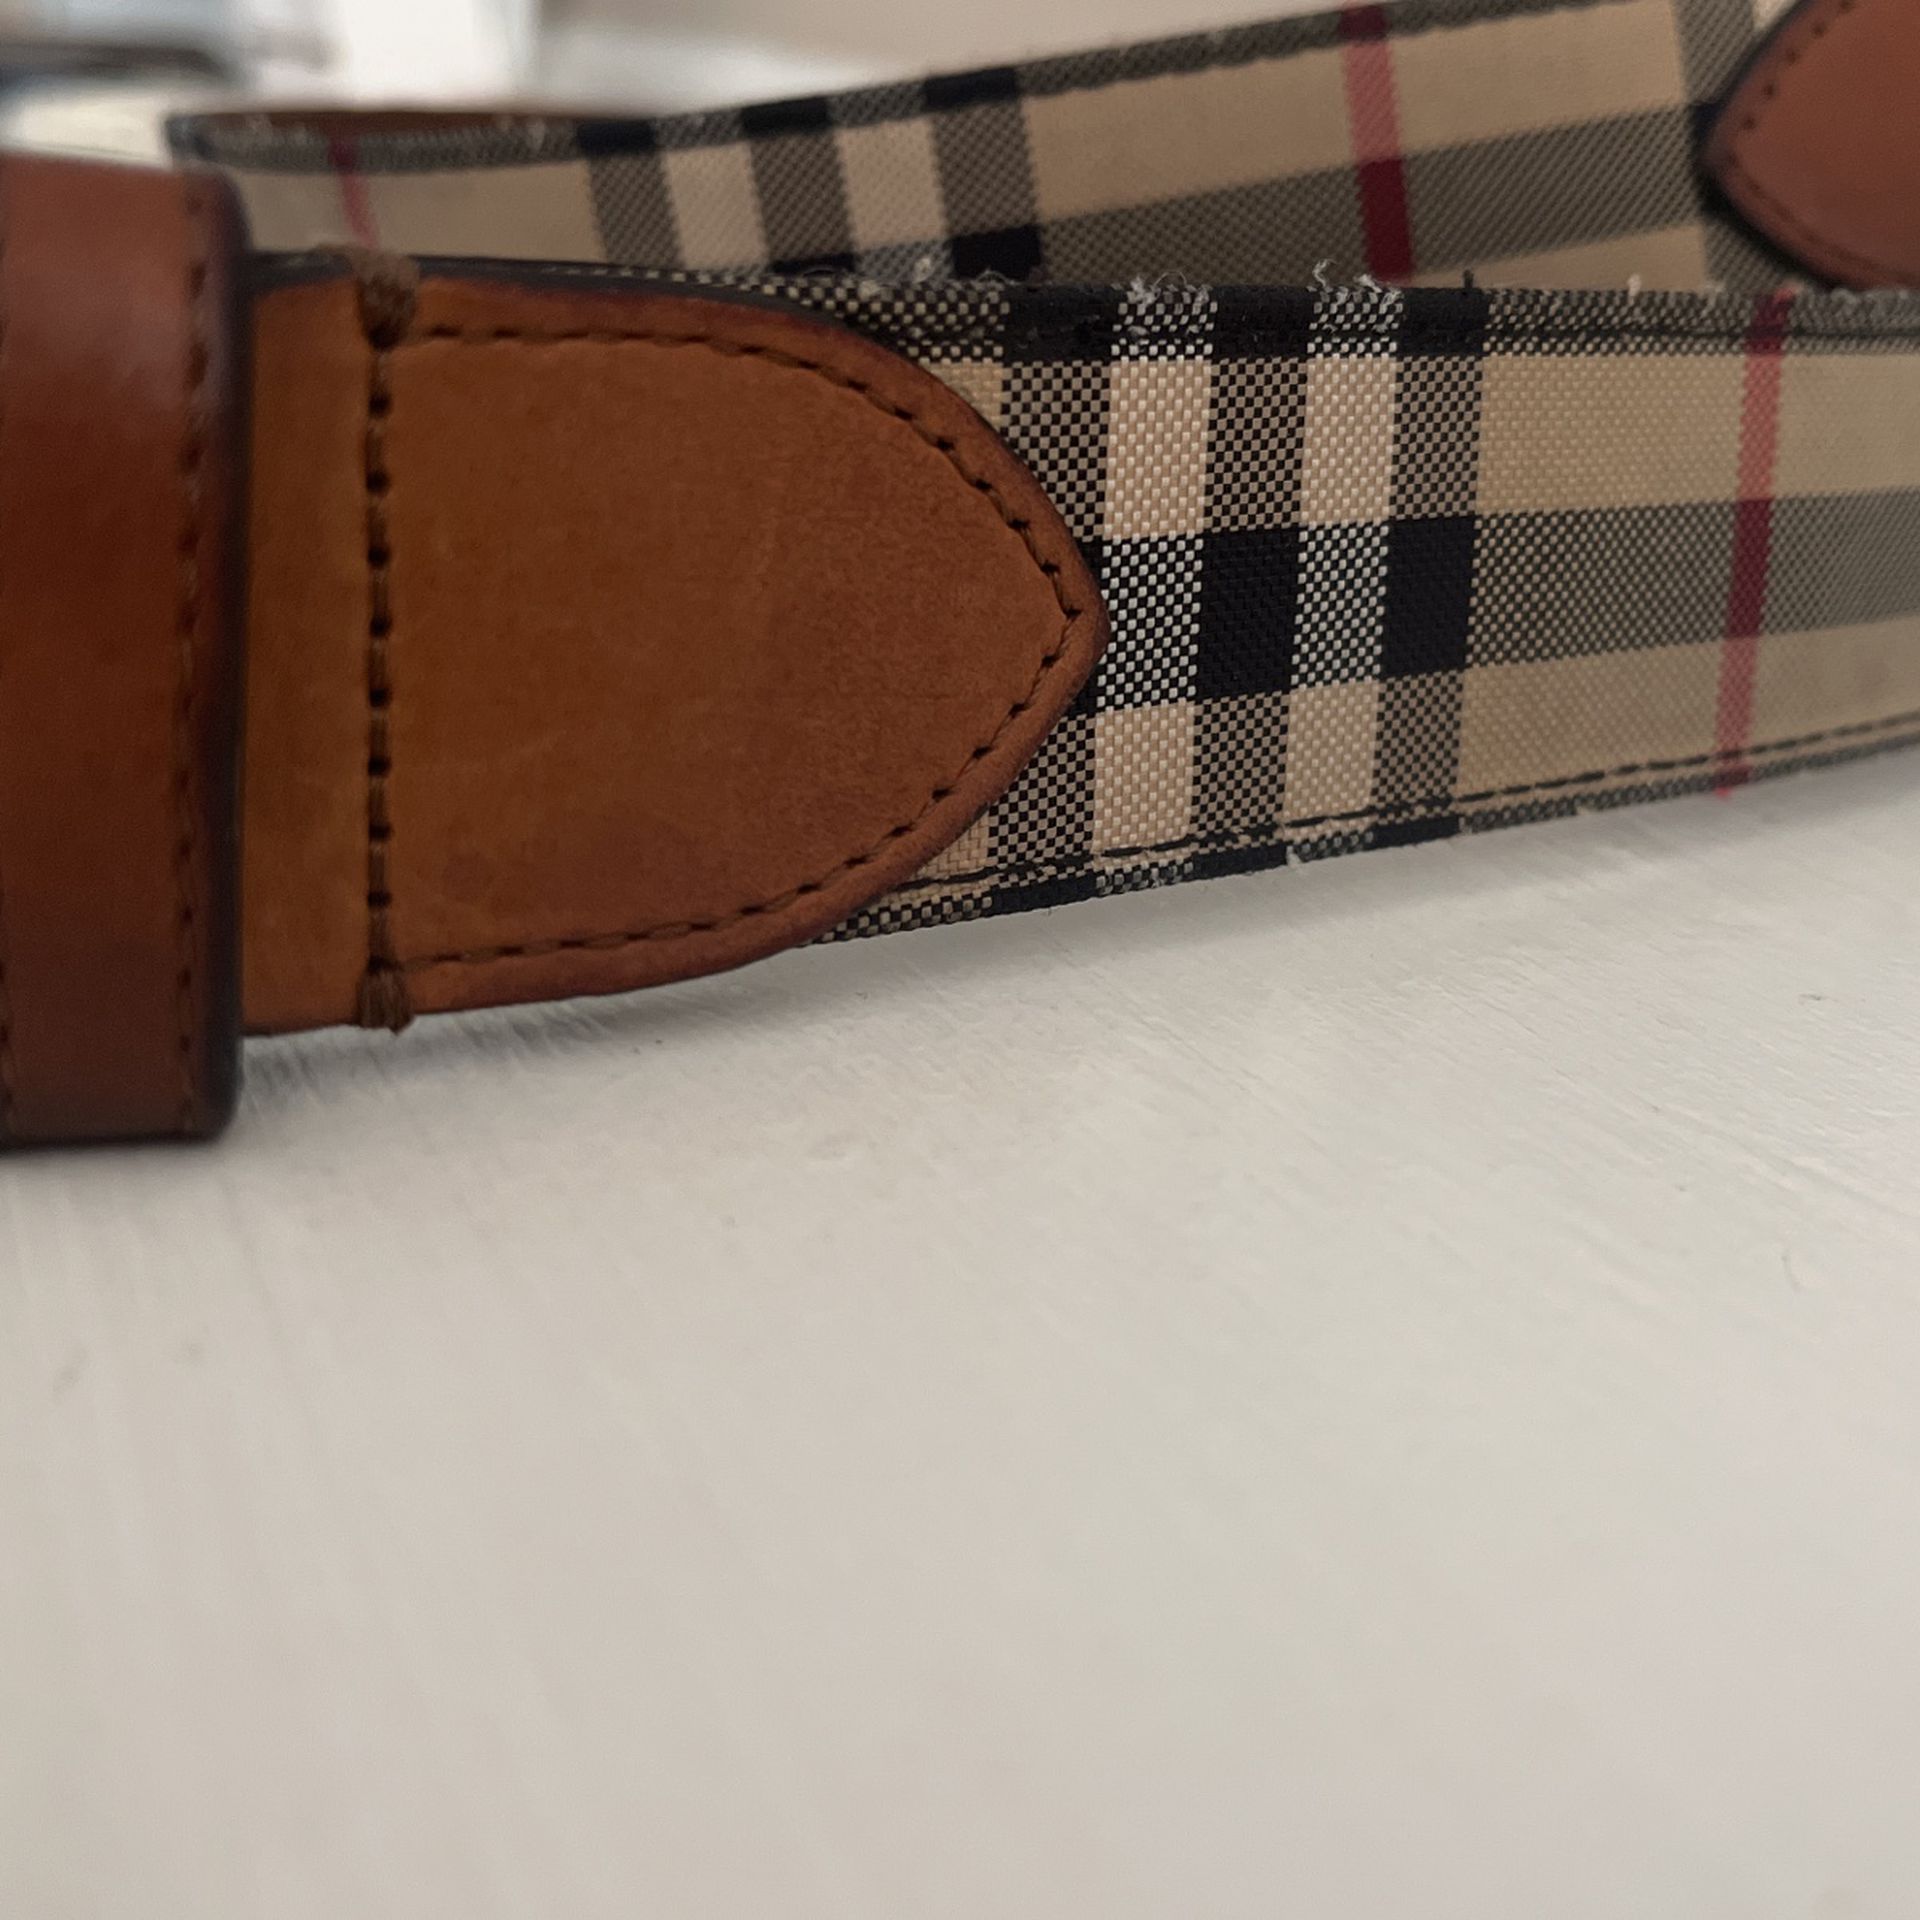 Burberry Belt for Sale in Bloomfield, CT - OfferUp